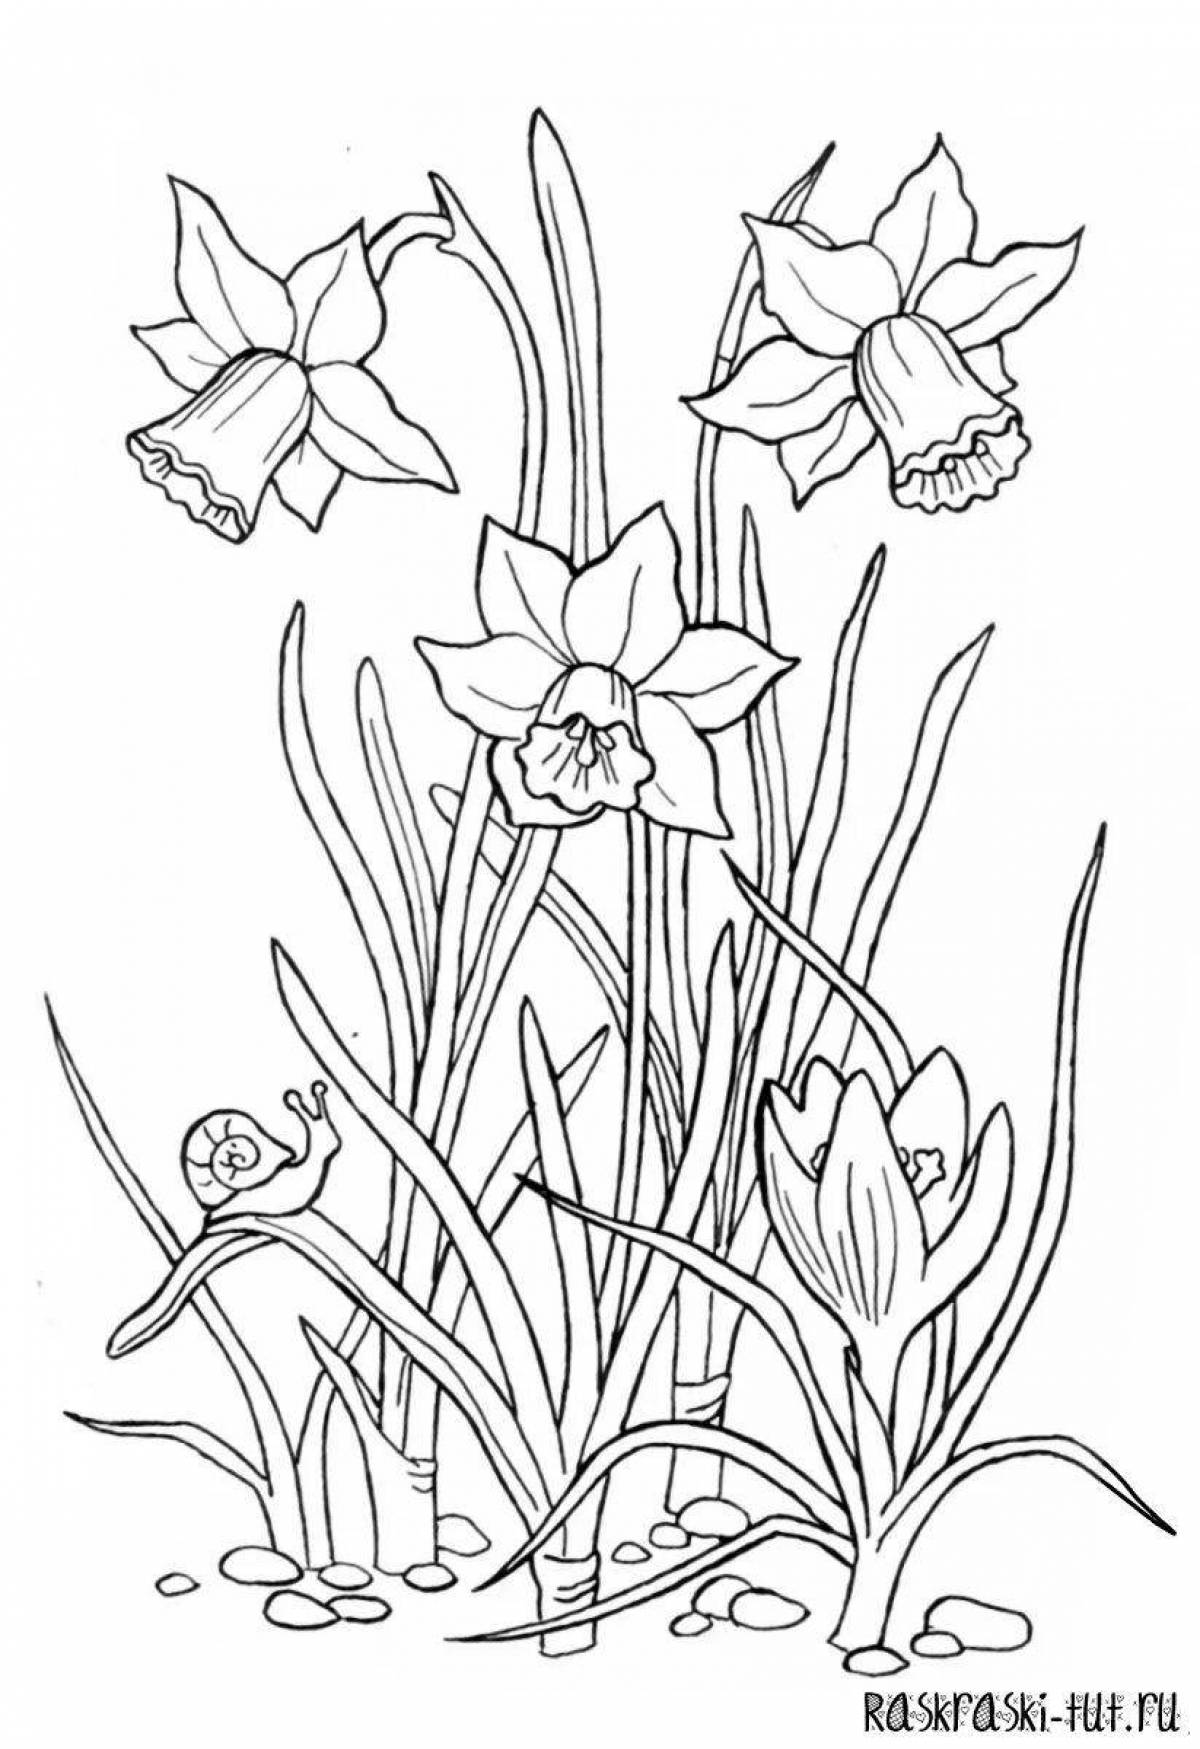 Adorable spring flowers coloring book